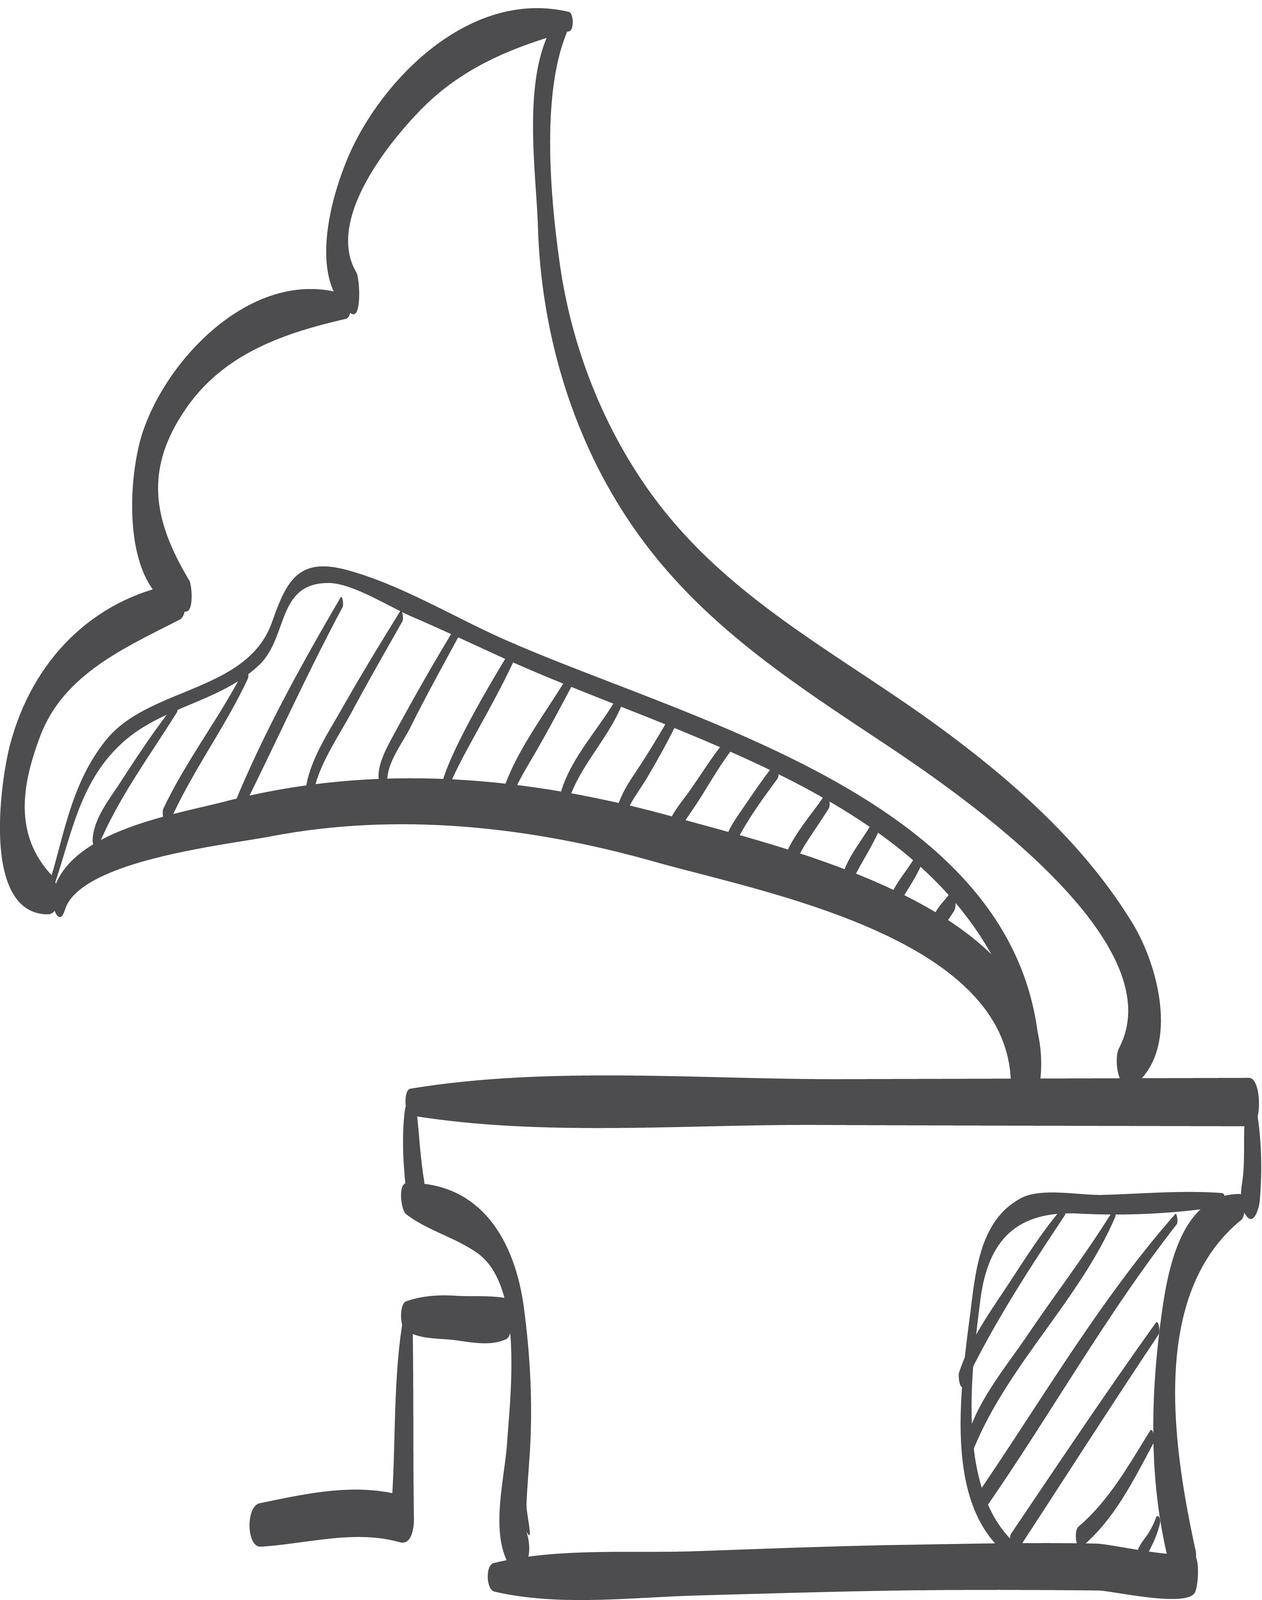 Gramophone icon in doodle sketch lines. Music instrument player listen nostalgia